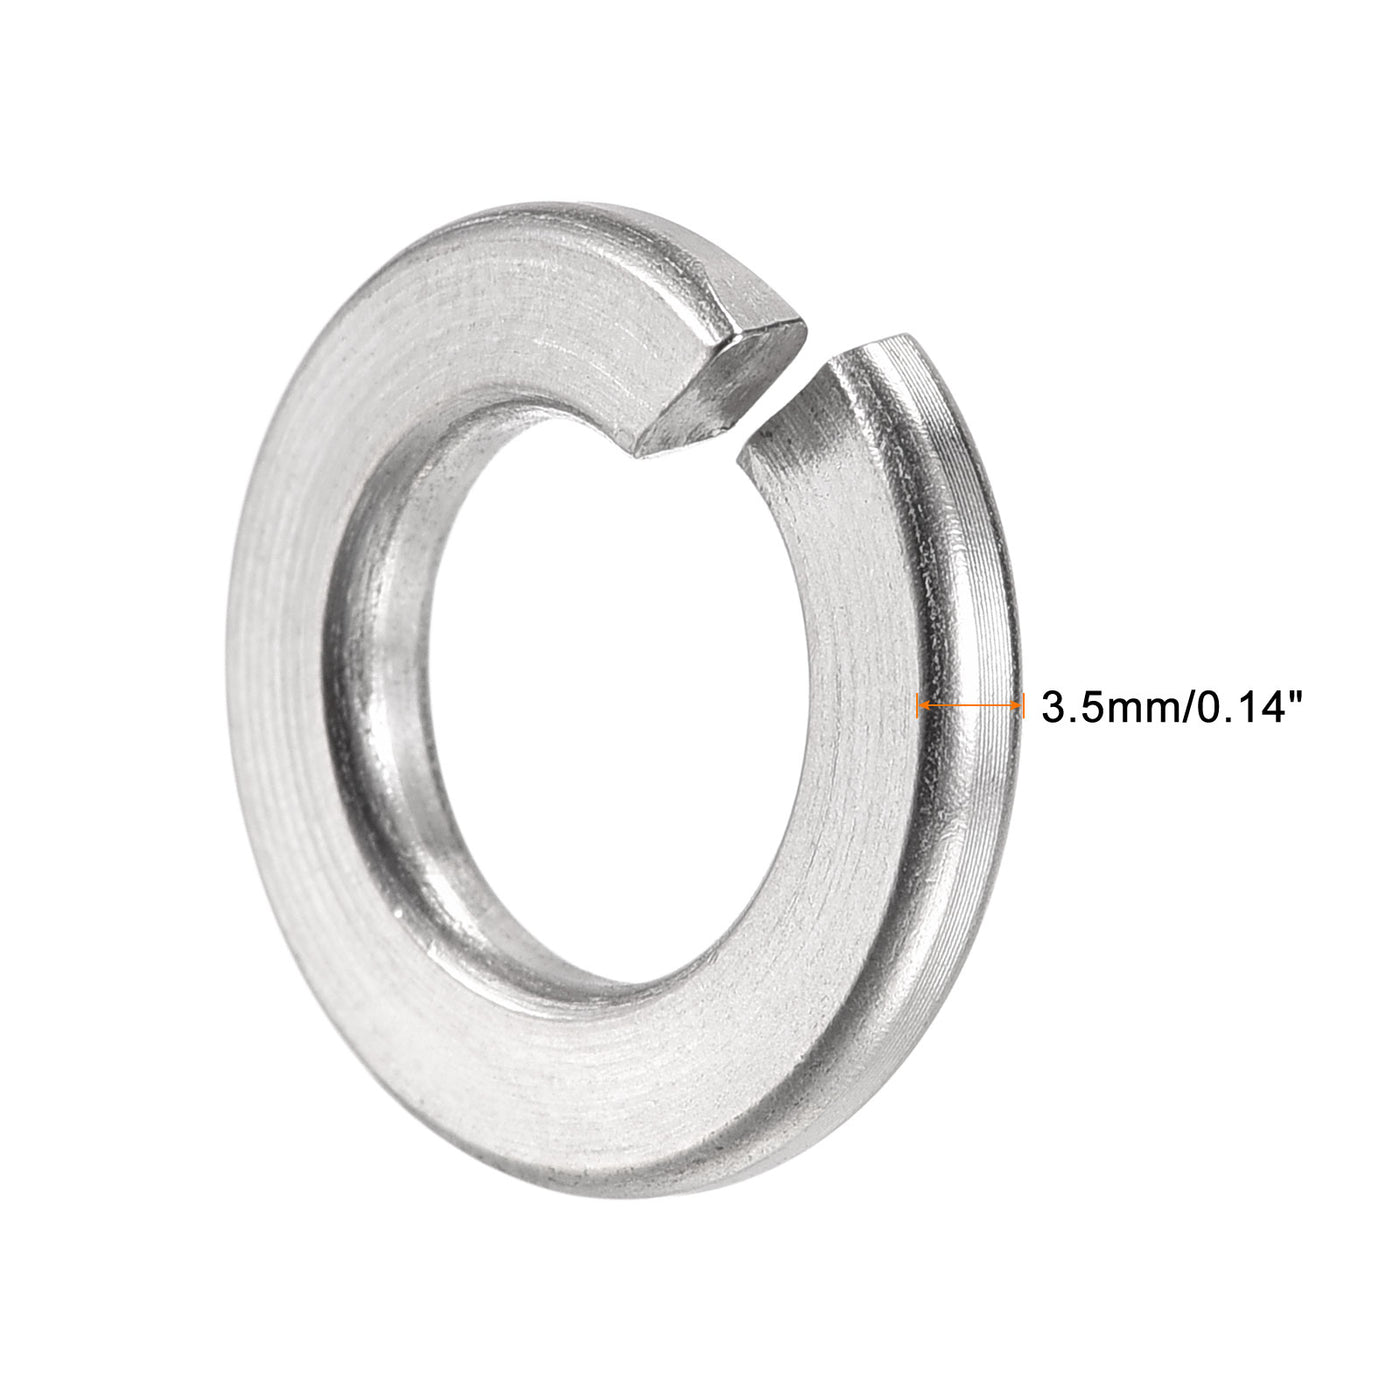 uxcell Uxcell Split Lock Washer, 304 Stainless Steel Spring Lock Washer for Industrial Products